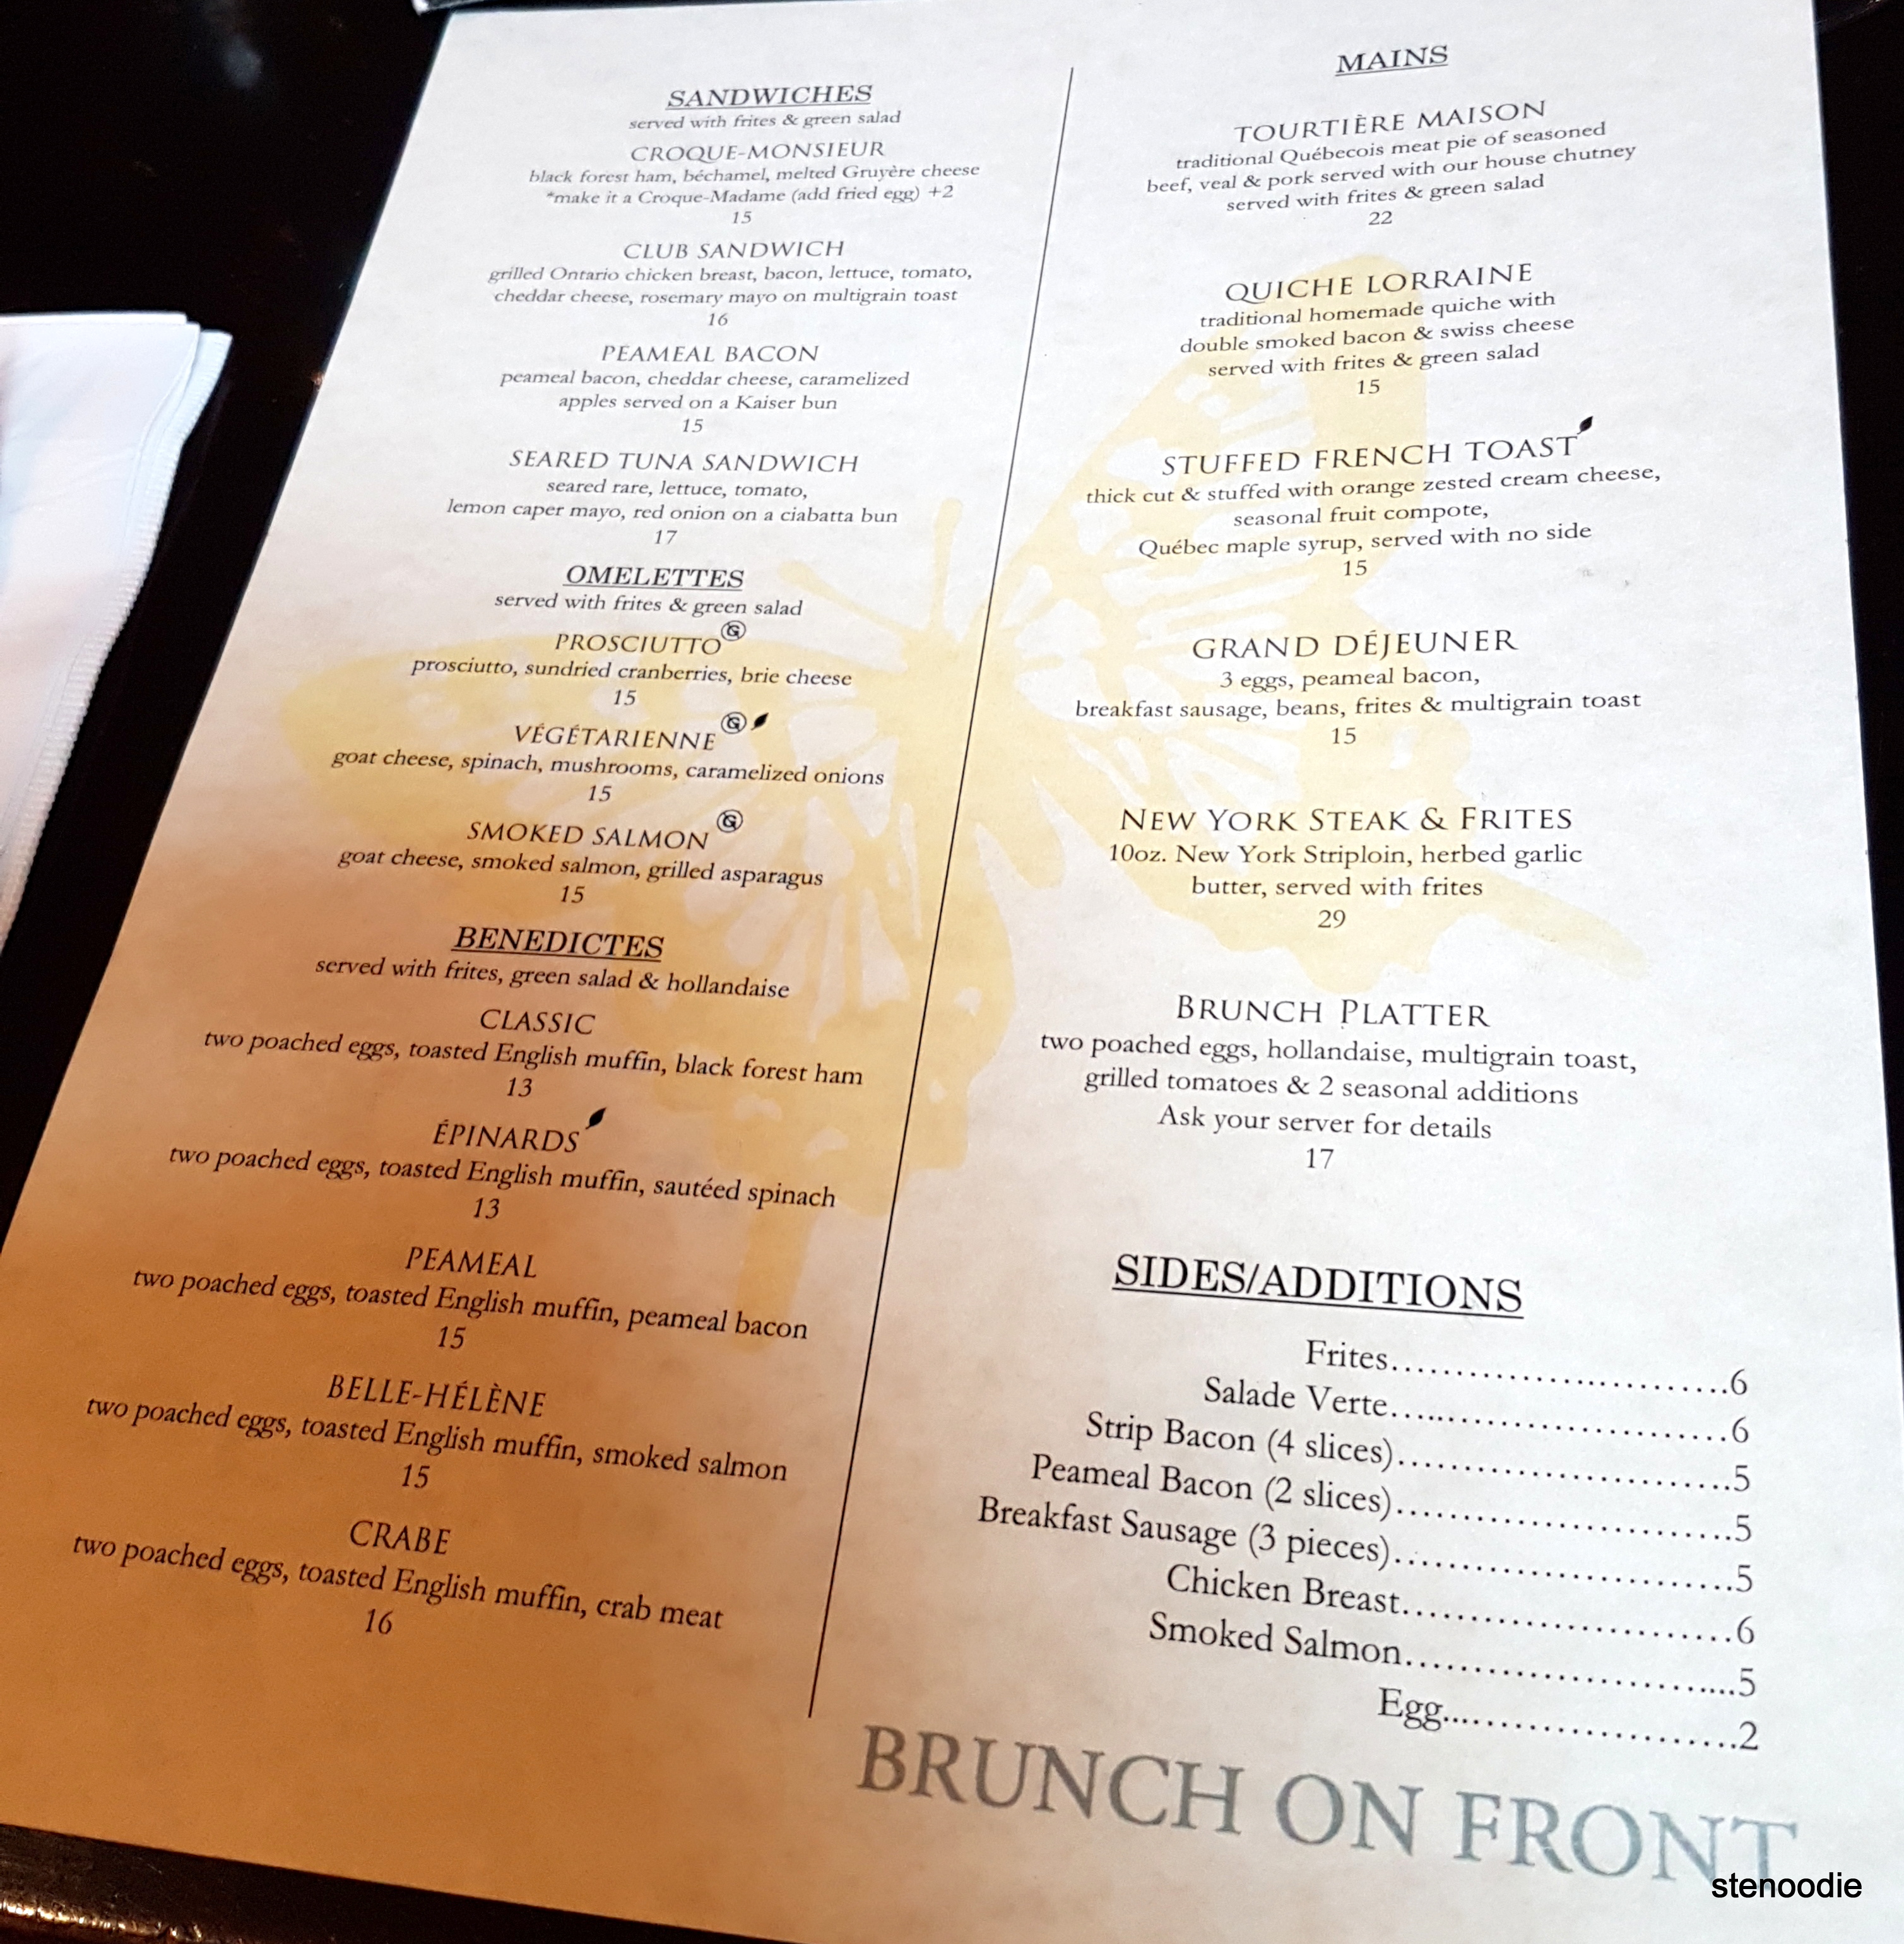 Le Papillon On Front brunch menu and prices